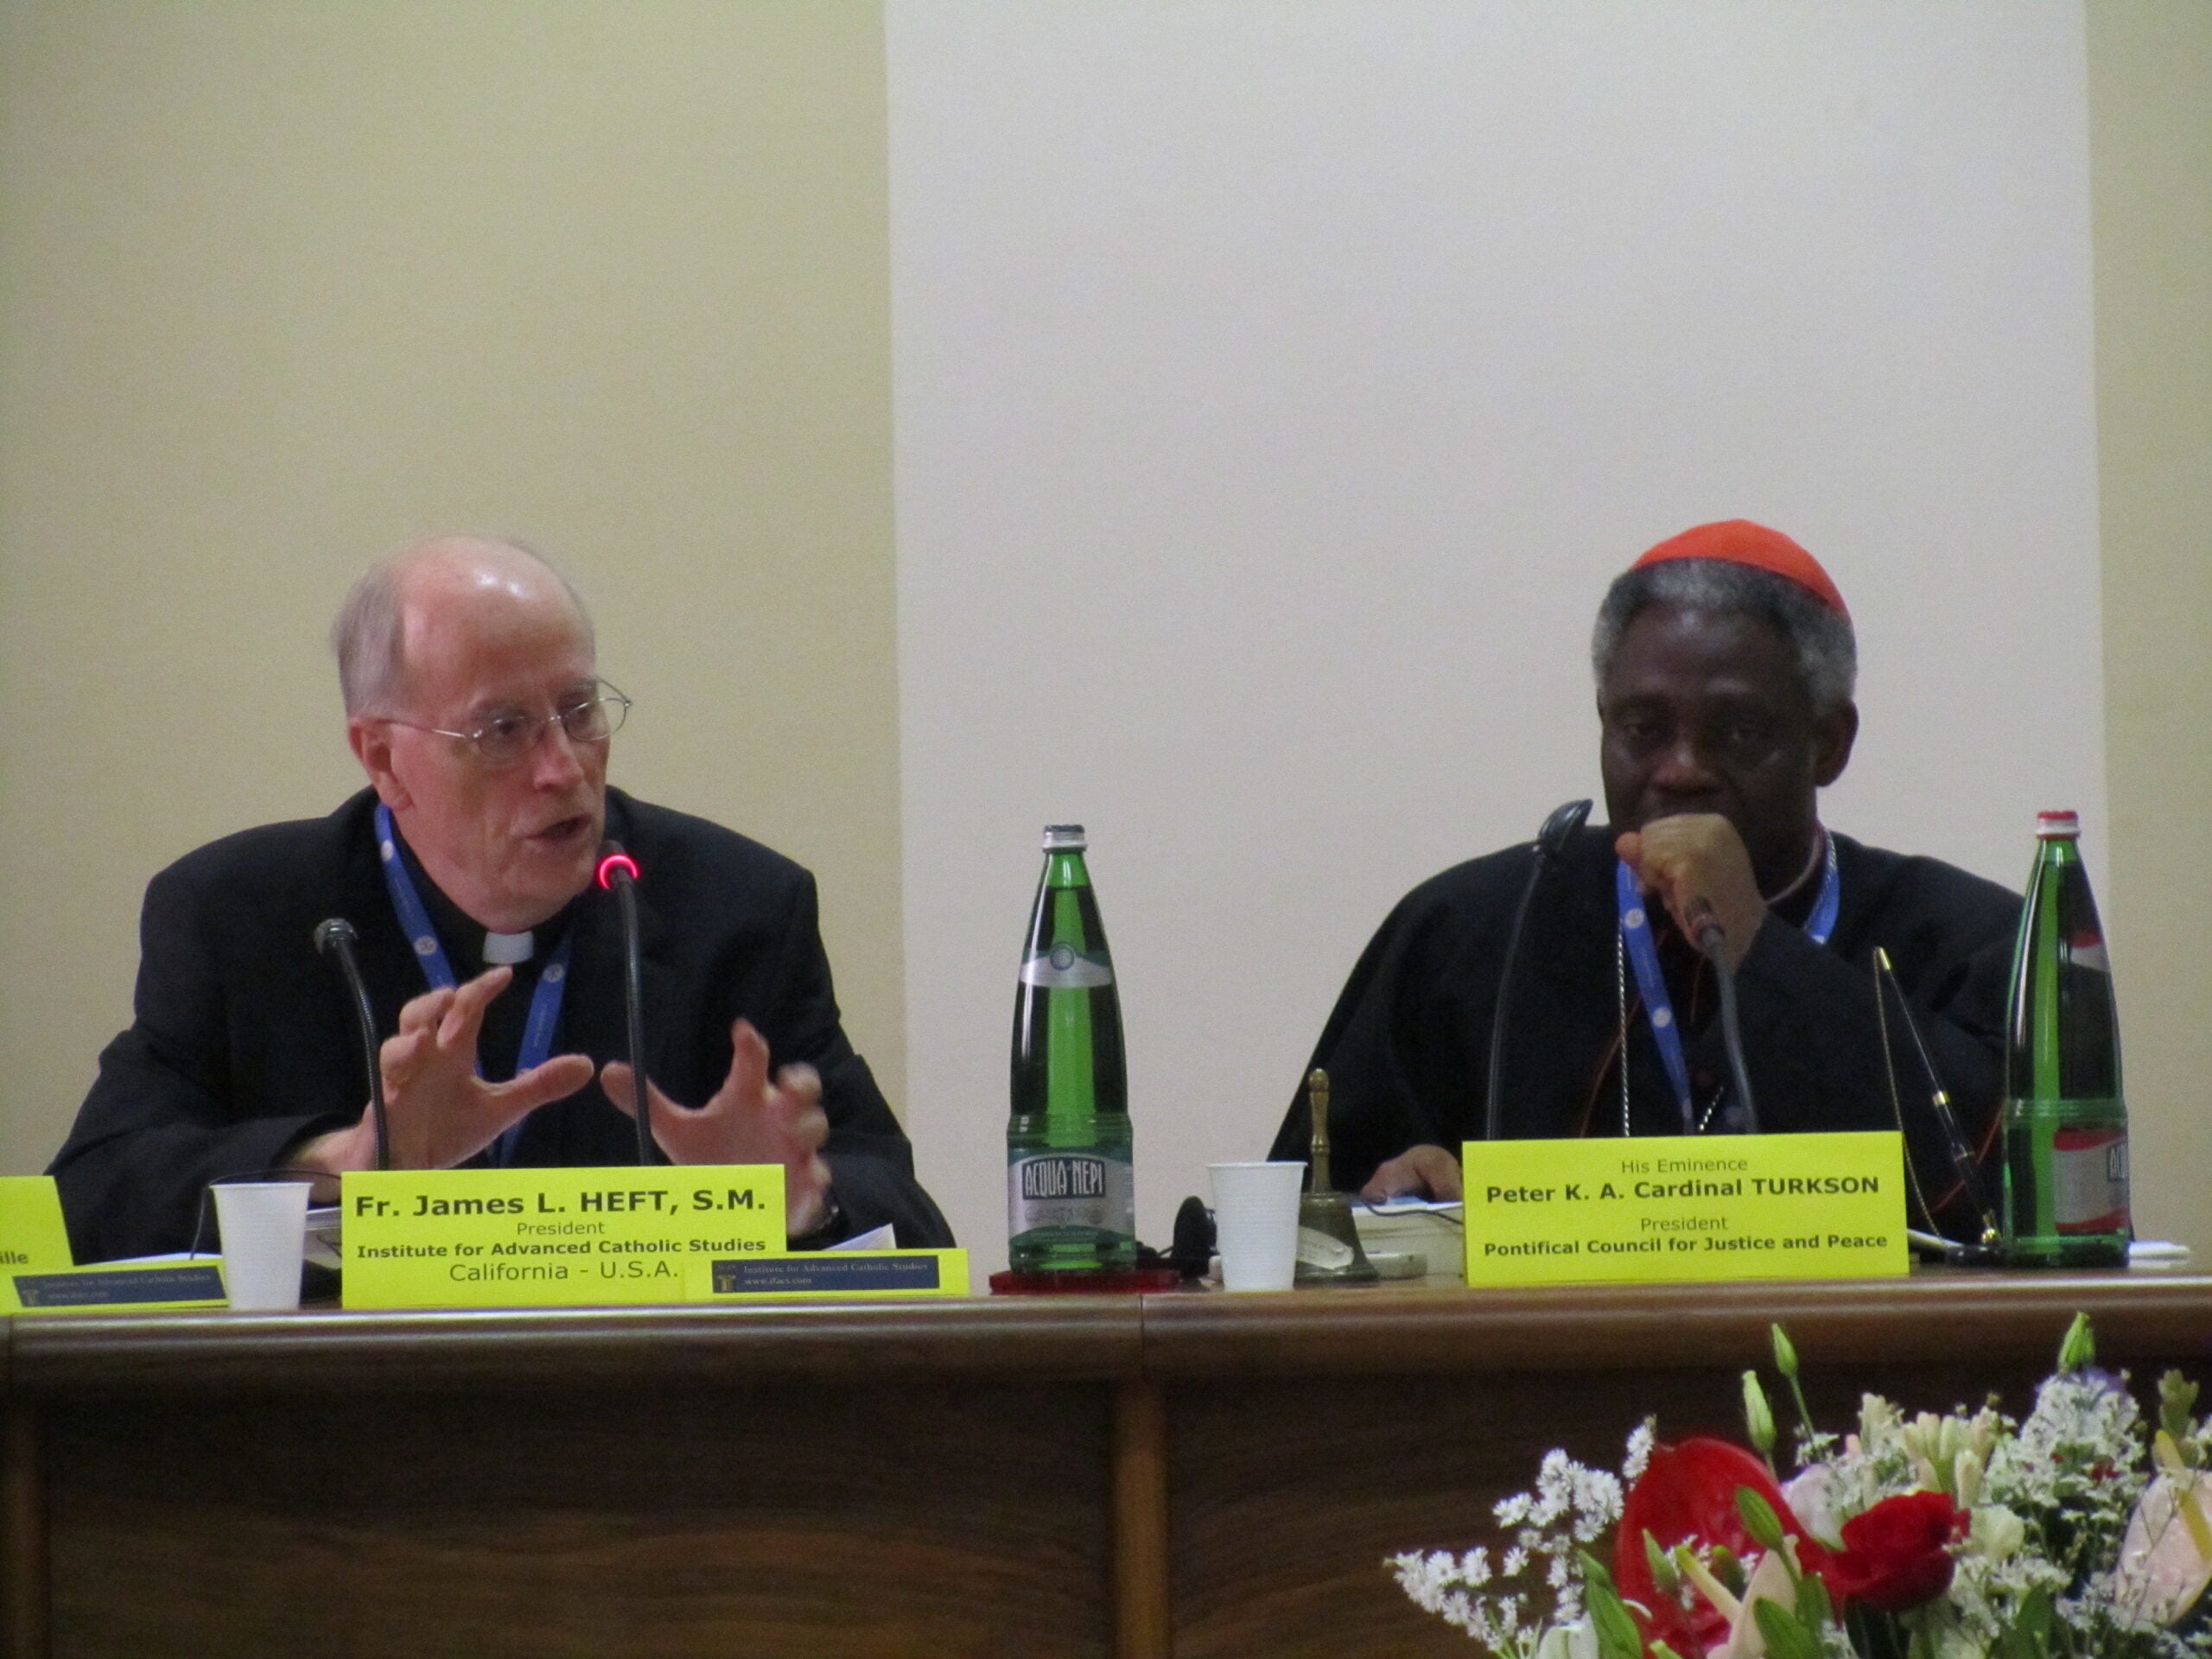 A photo of Fr. Heft was in Rome at a Vatican confrenece with Cardinal Turkson.